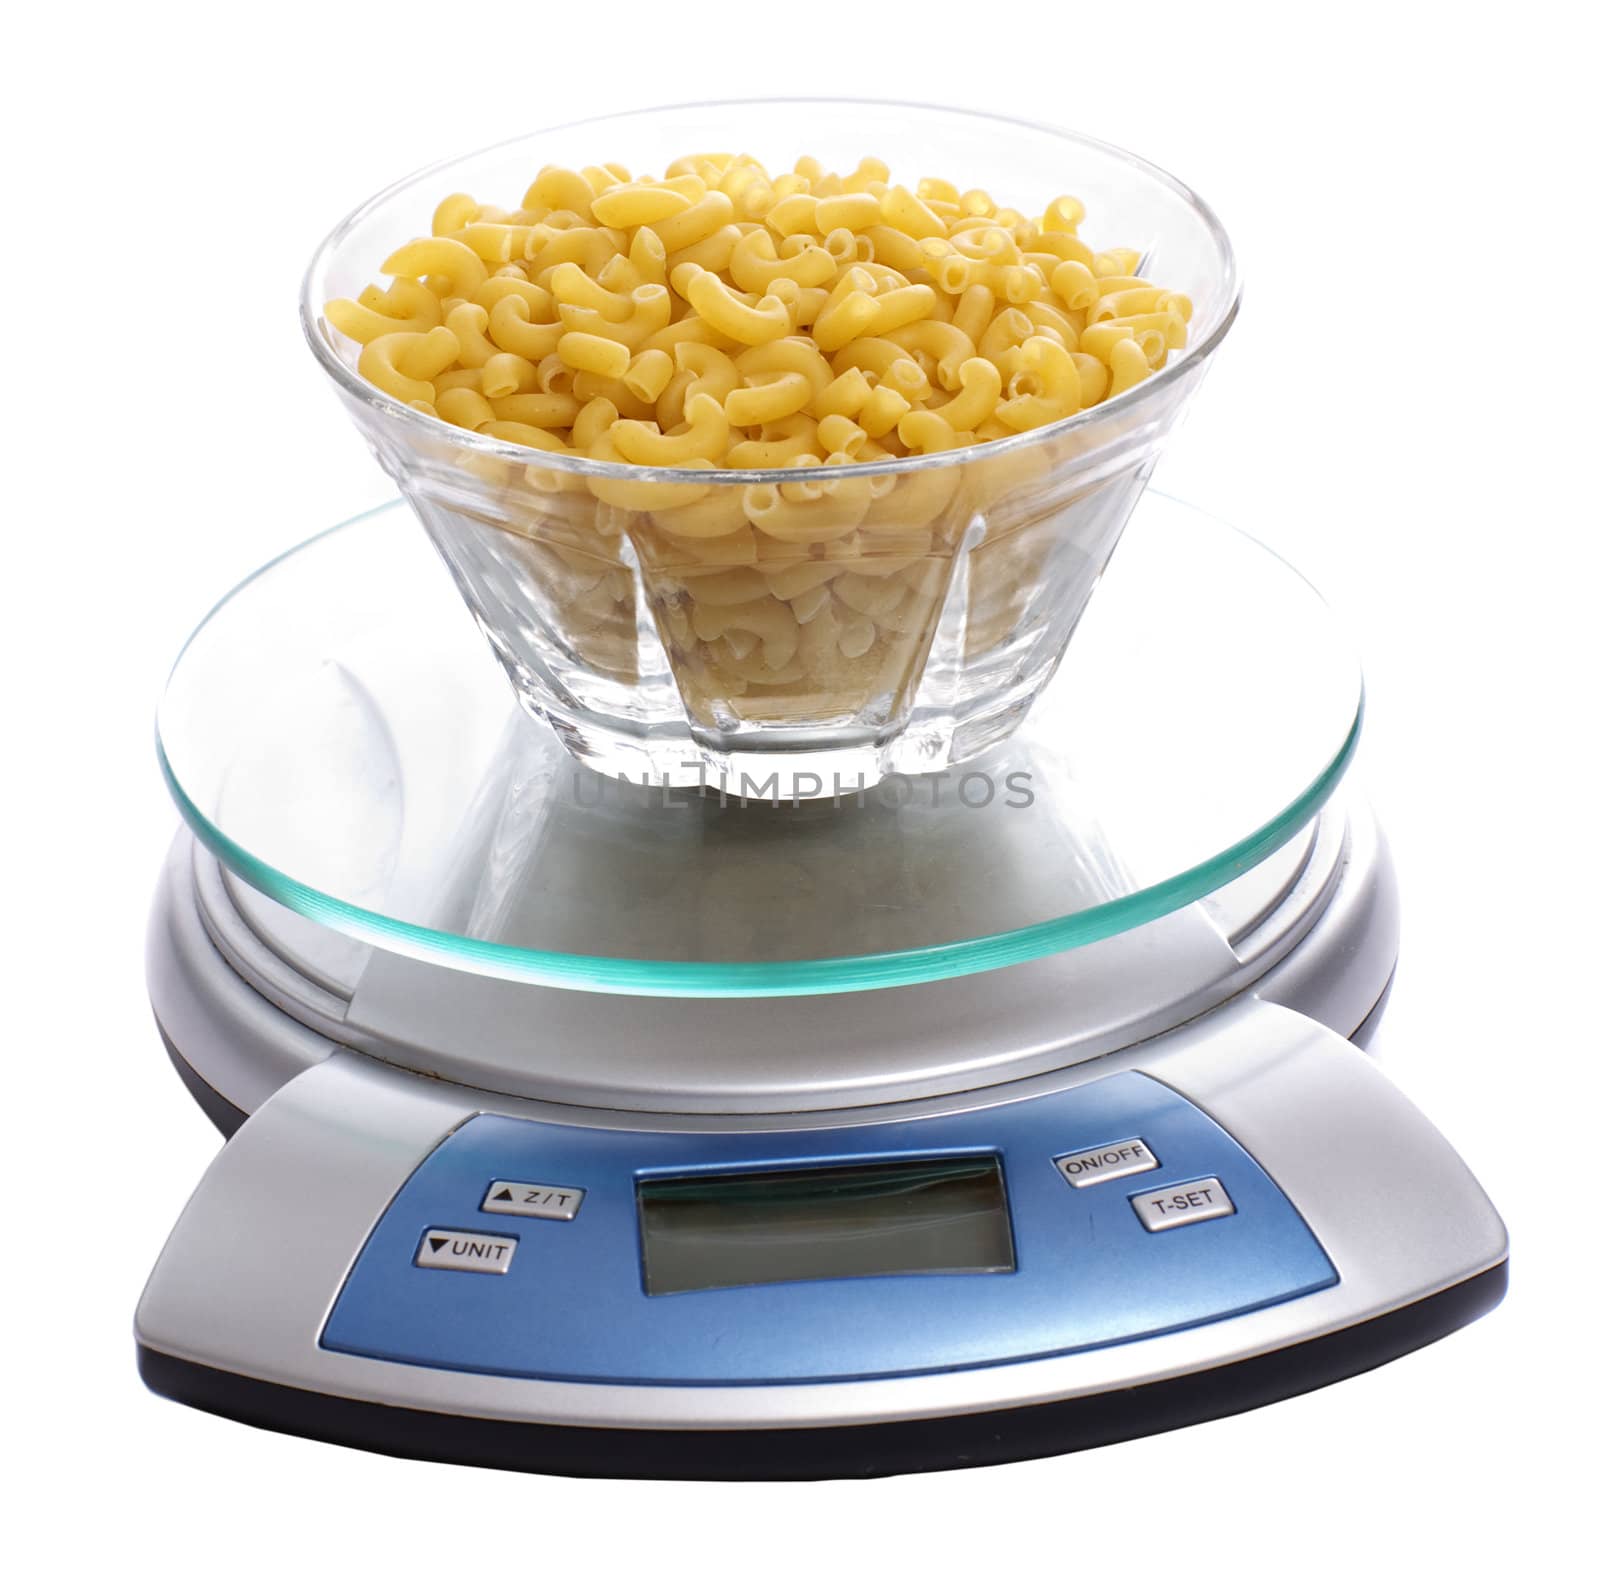 A bowl of uncooked macaroni full of carbohydrates, sitting on a food scale, isolated against a white background